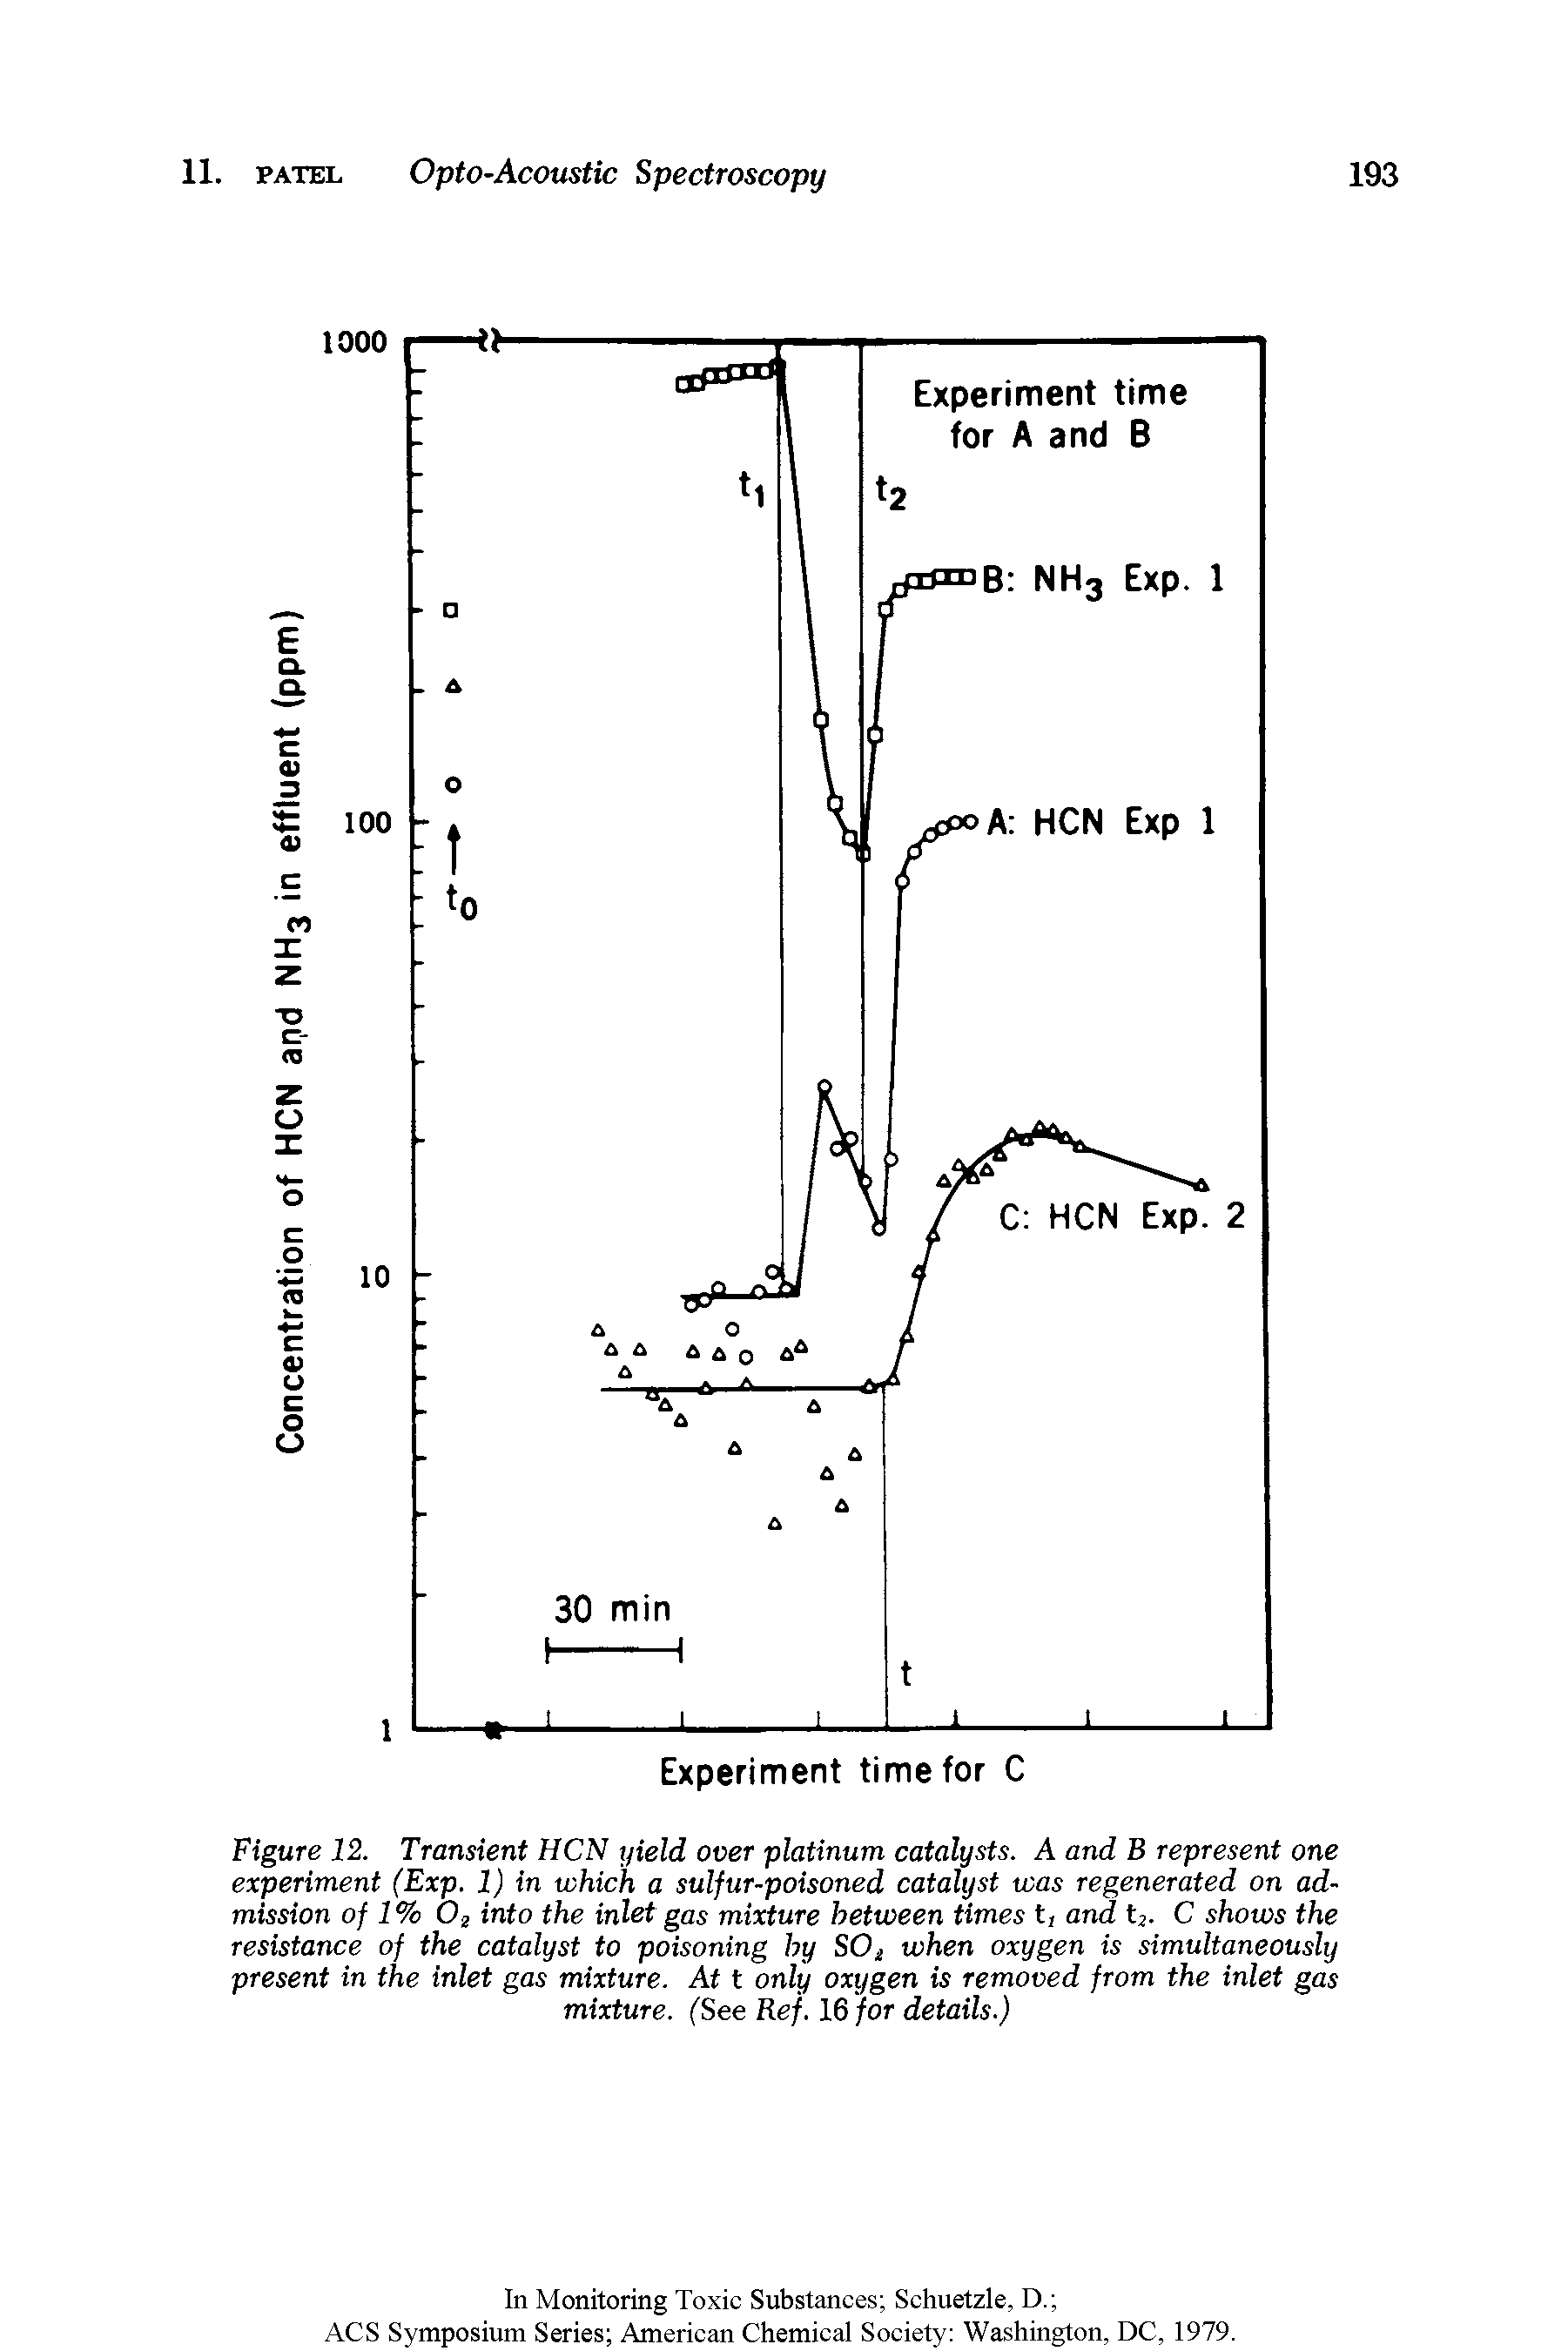 Figure 12. Transient HCN yield over platinum catalysts. A and B represent one experiment (Exp. 1) in which a sulfur-poisoned catalyst was regenerated on admission of 1% O2 into the inlet gas mixture between times t, and C shows the resistance of the catalyst to poisoning by SO when oxygen is simultaneously present in the inlet gas mixture. At t only oxygen is removed from the inlet gas mixture. (See Ref. 16 for details.)...